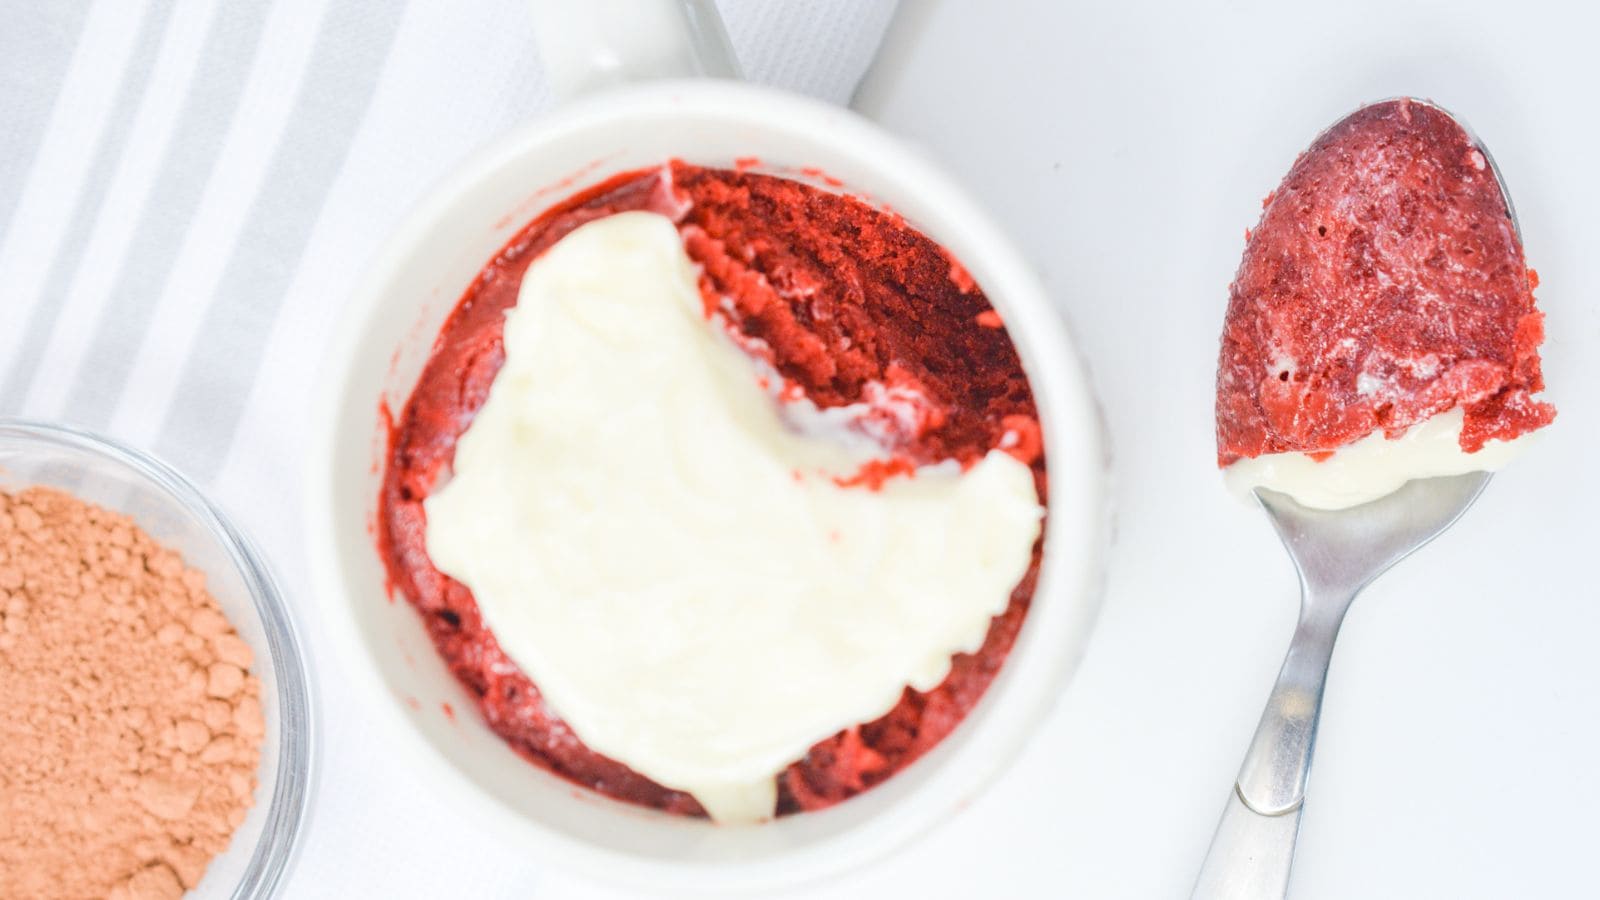 <p>Treat yourself to the rich flavor of red velvet with this single-serving mug cake. With its vibrant color and indulgent taste, it’s the perfect dessert for one person. The simplicity of this recipe makes it a great choice for a quick and easy dessert fix. In just a few minutes, you can have a moist and delicious cake ready to enjoy. Plus, it’s made with basic pantry ingredients, so you can whip it up whenever a craving strikes. Whether you’re celebrating a special occasion or simply treating yourself, this mug cake is sure to hit the spot.<br><strong>Get the Recipe: </strong><a href="https://littlebitrecipes.com/red-velvet-mug-cake/?utm_source=msn&utm_medium=page&utm_campaign=msn">Red Velvet Mug Cake</a></p>